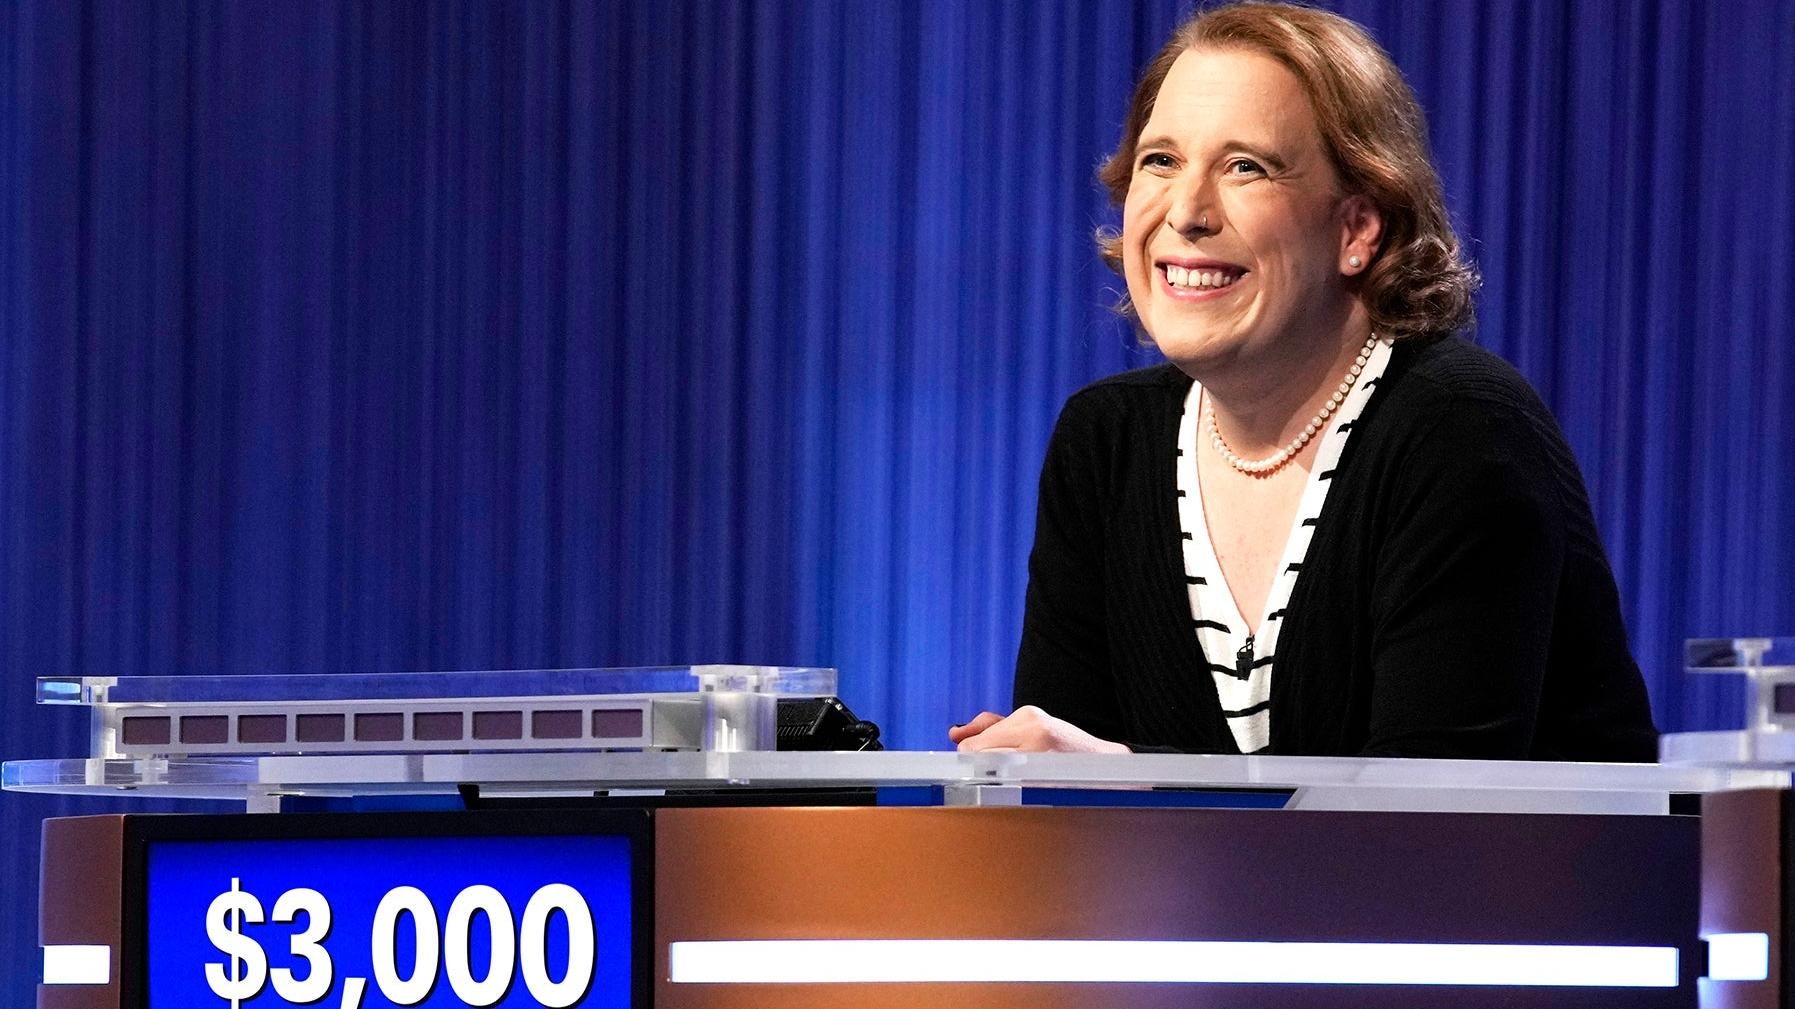 Amy Schneider becomes Jeopardy! contestant with second most consecutive wins, behind Ken Jennings